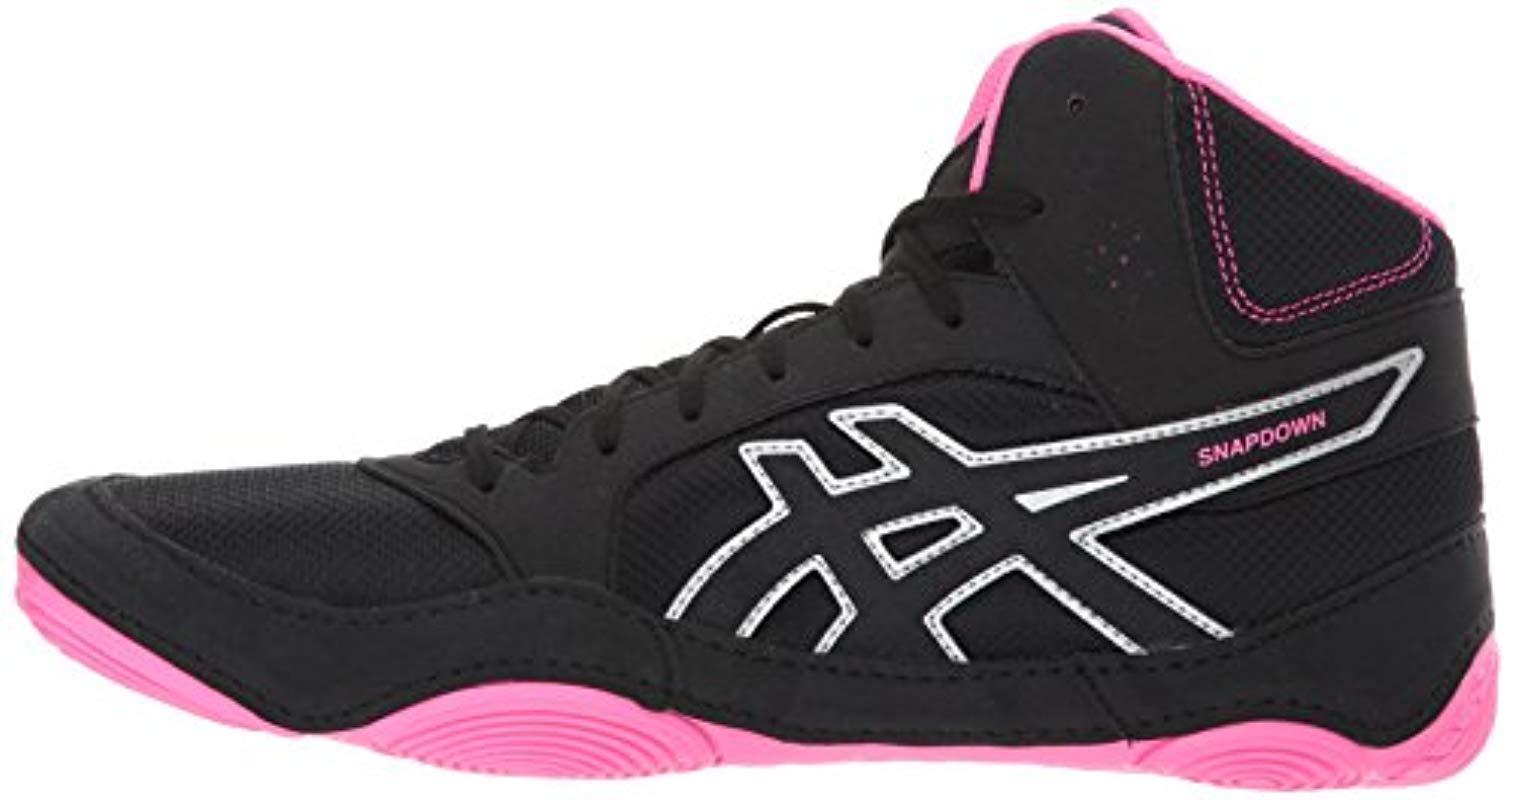 asics snapdown 2 pink